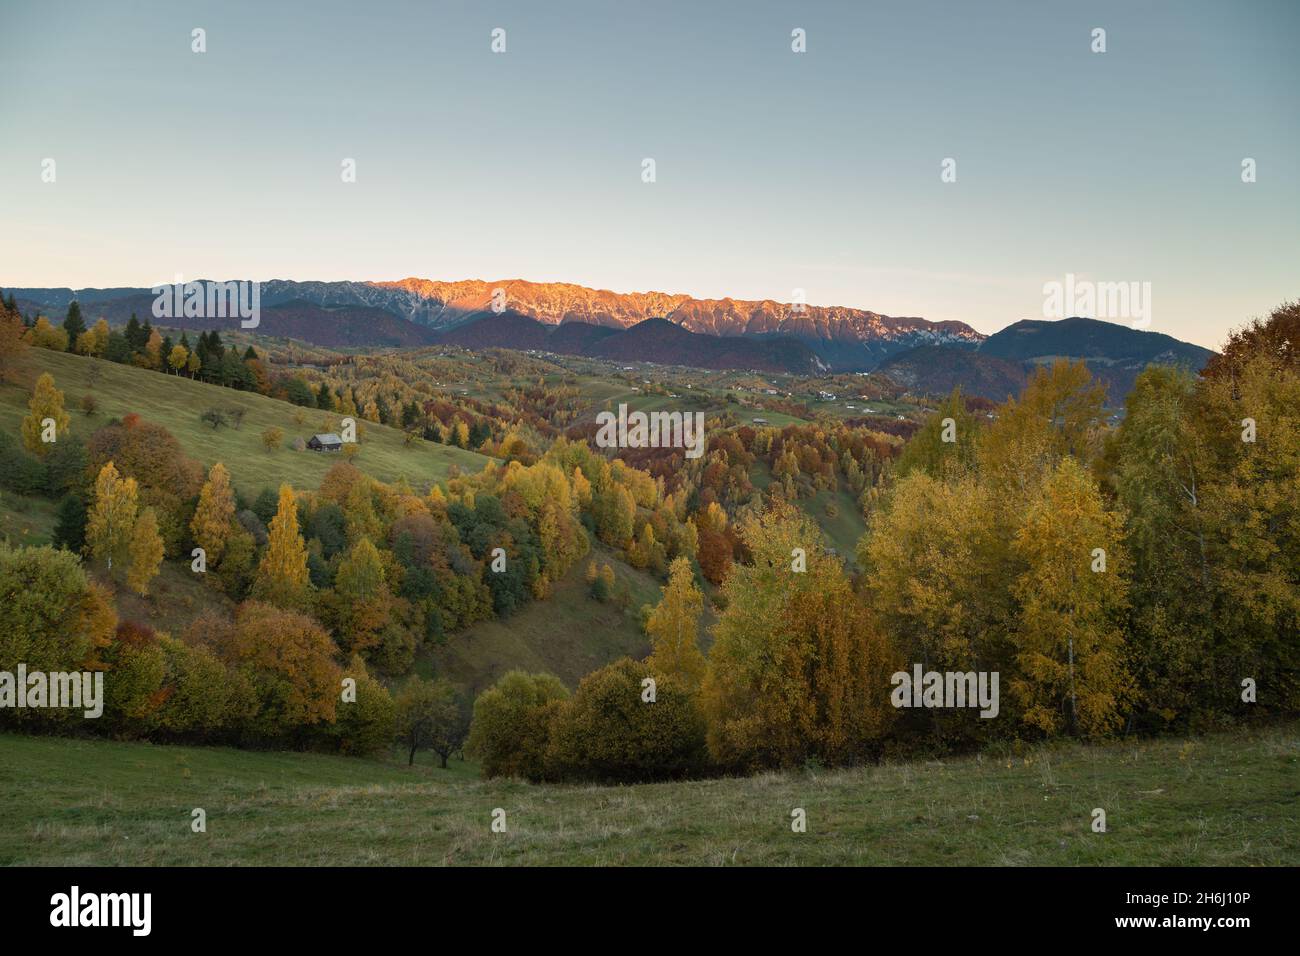 Mountain rural landscape with autumn colors In Brasov county, Romania Stock Photo